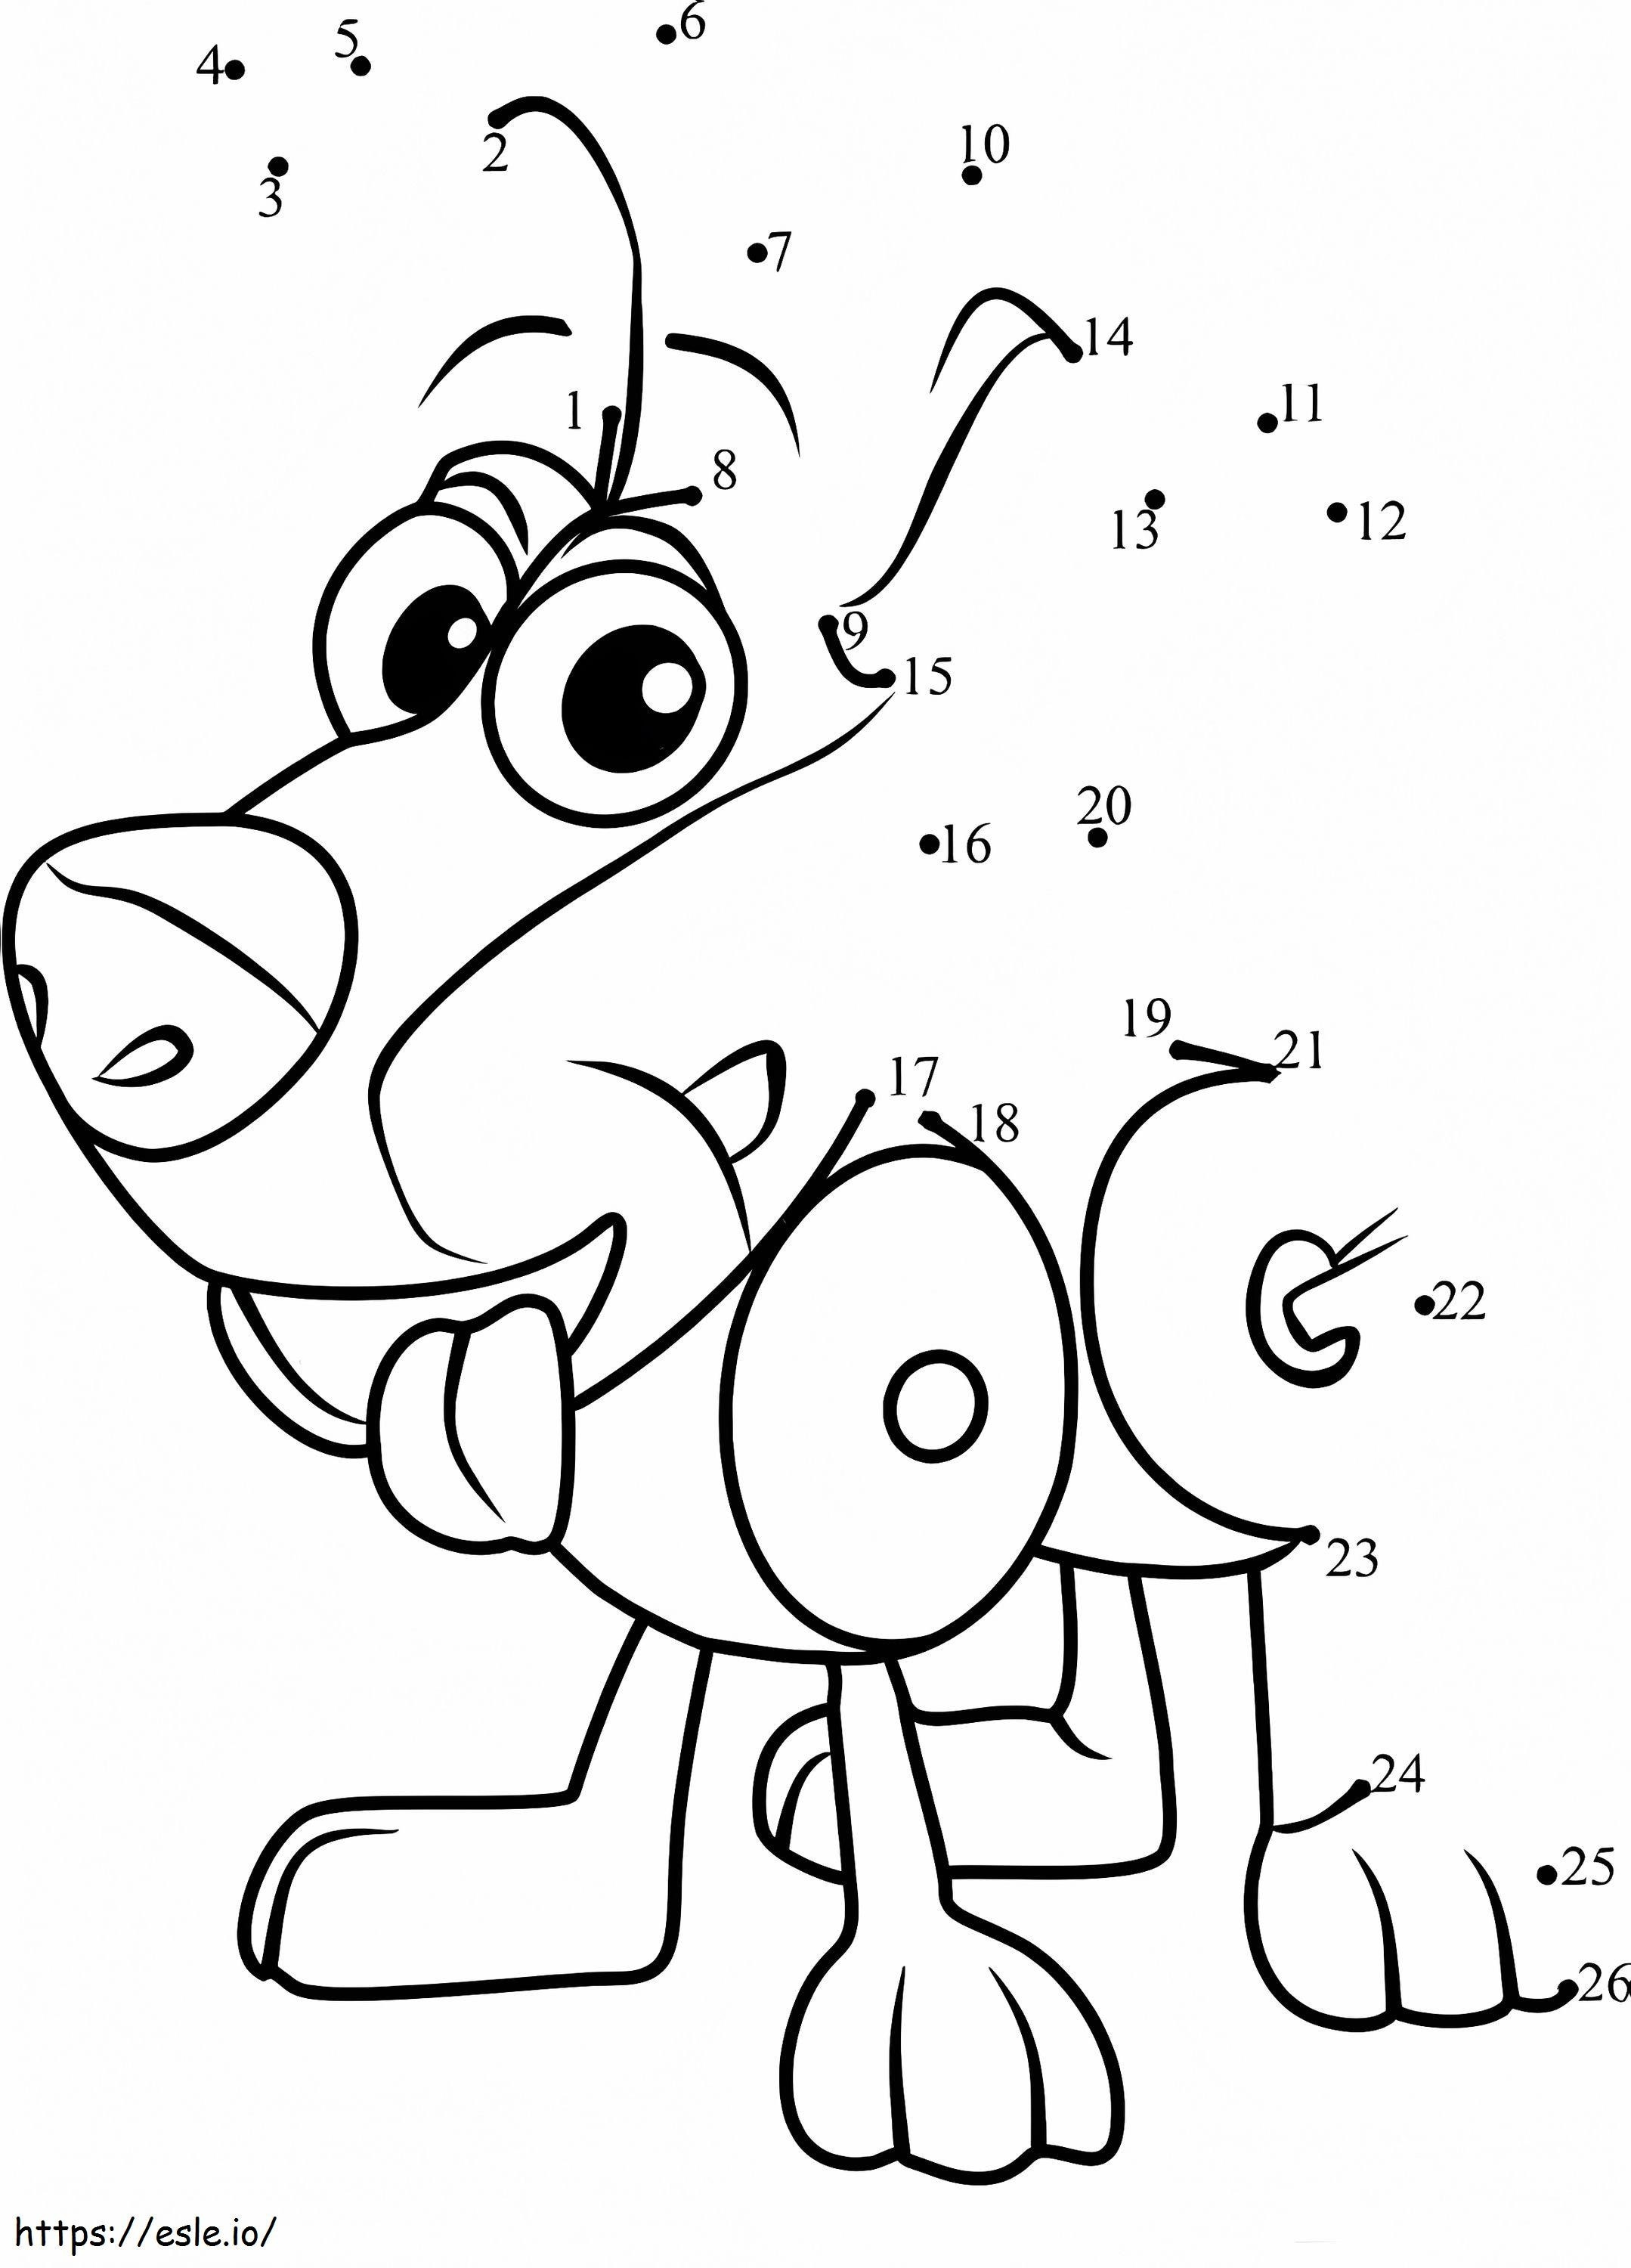 Dog Color By Number 1 coloring page